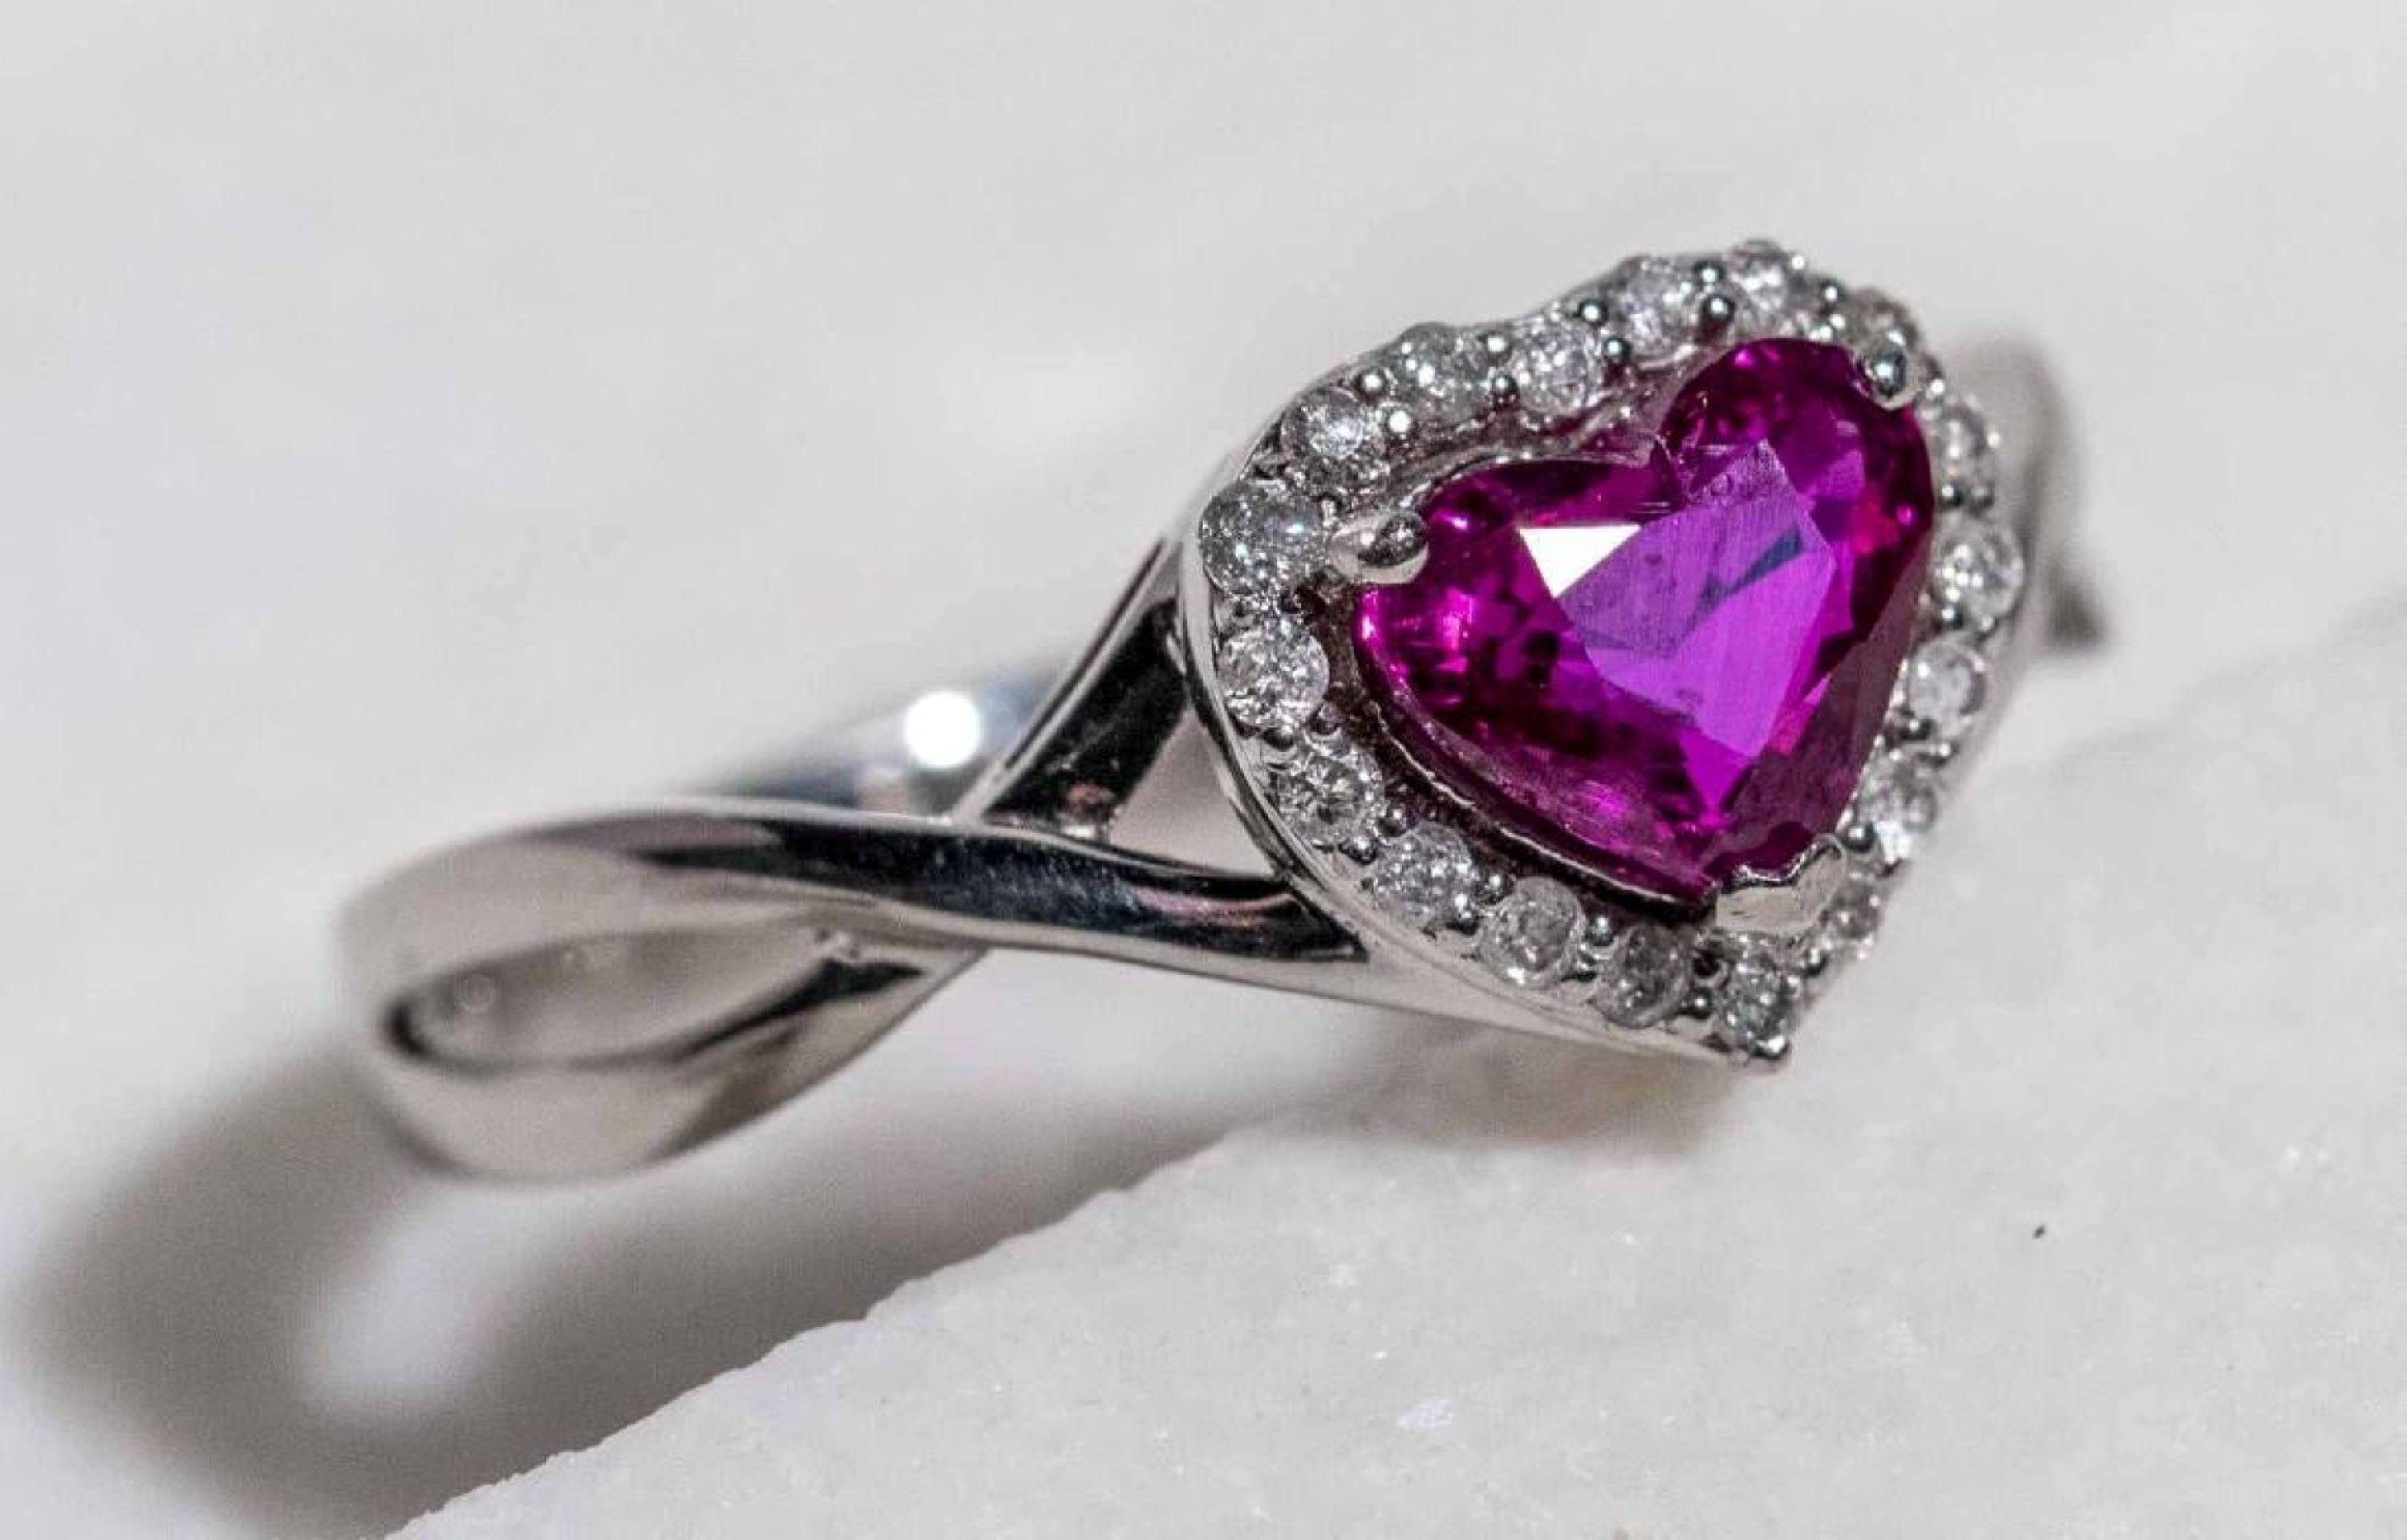 Platinum ring set with a heart shaped faceted ruby  (1.04 ct) within a border of round diamonds.( tcw .12), accompanied by GIA Ruby Report 2185383892 dated May 8 2017, stating NO HEAT TREATMENT).  Size 6 1/2  5.5 grams.